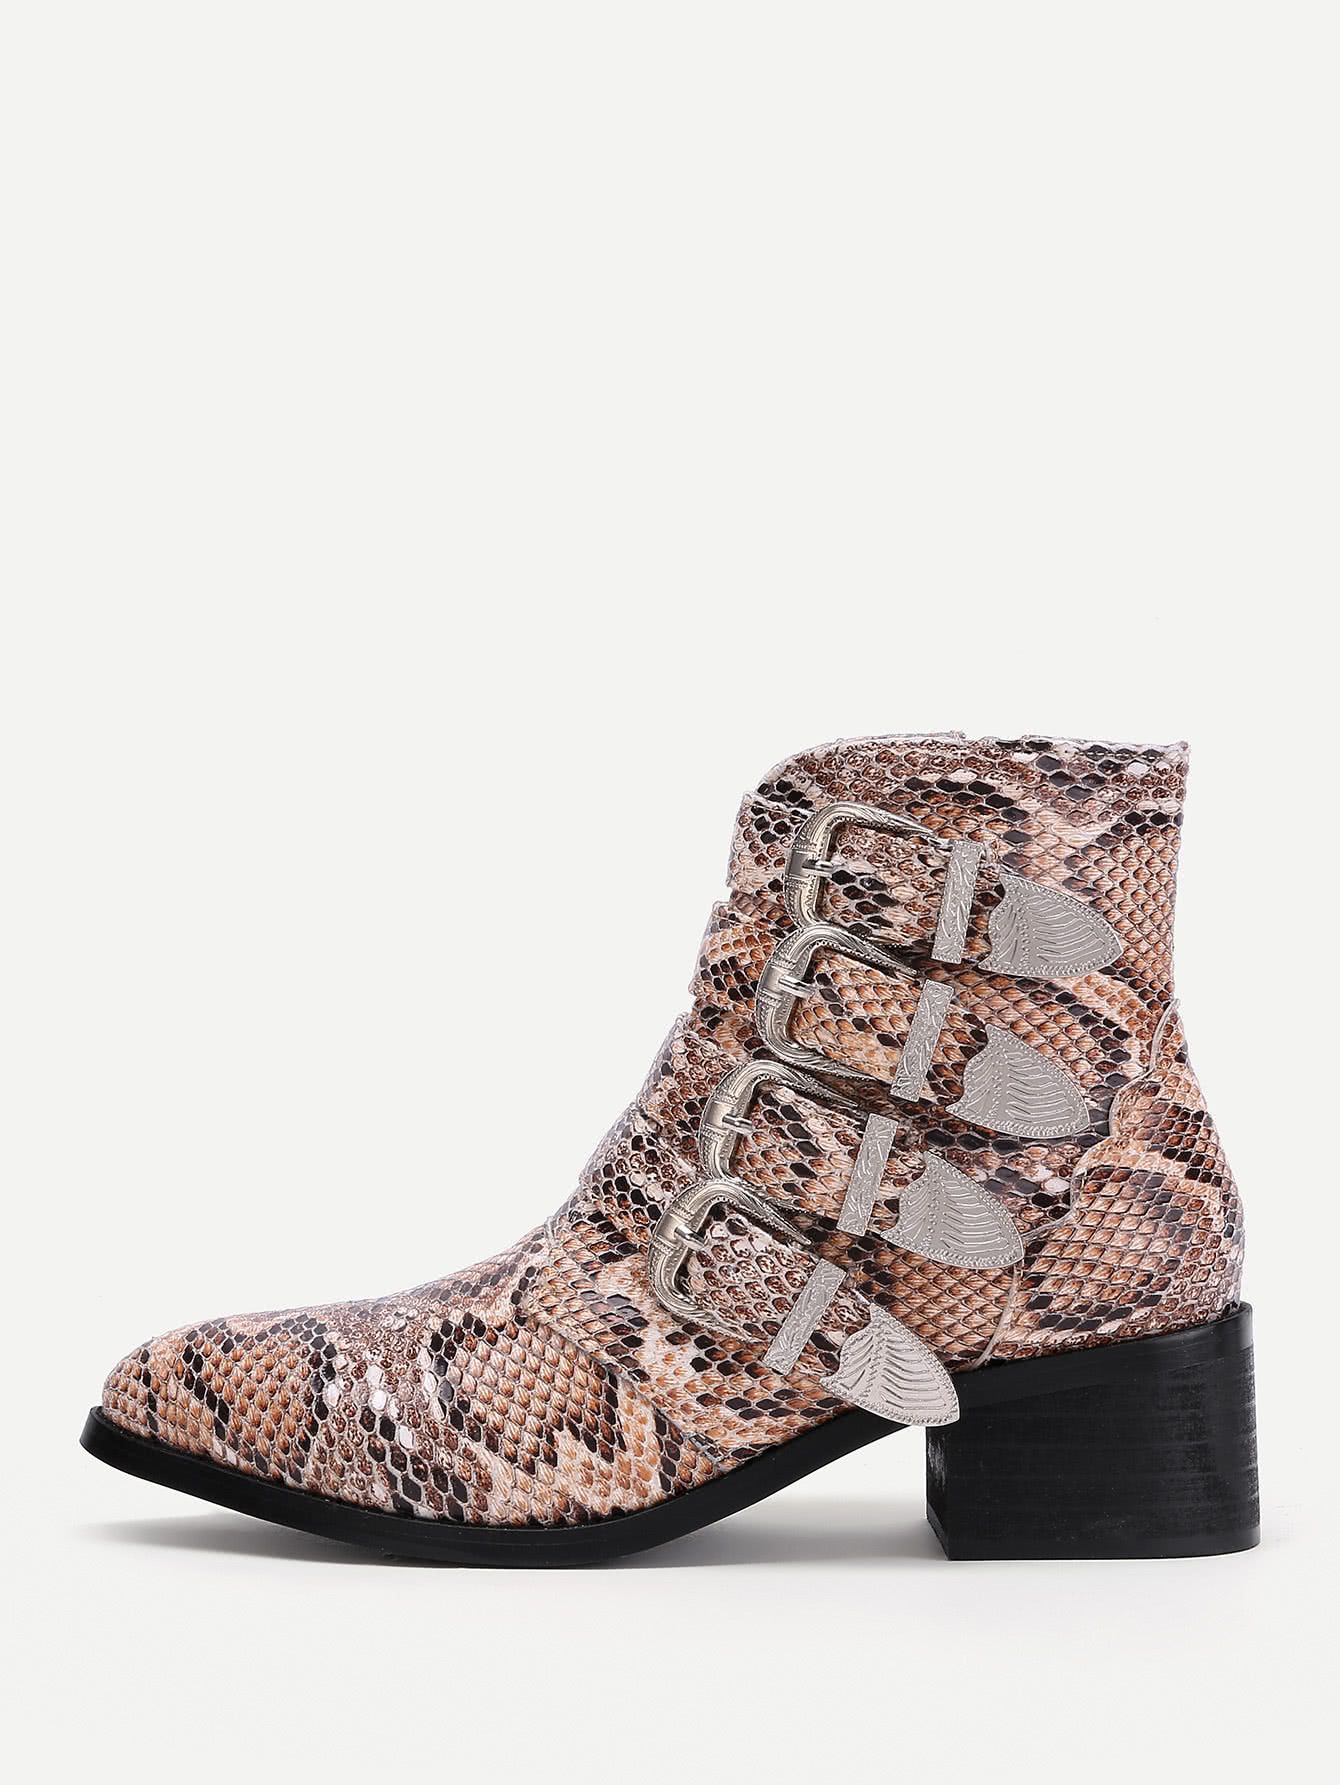 Buckle Decorated Snakeskin Print PU Ankle Boots | SHEIN